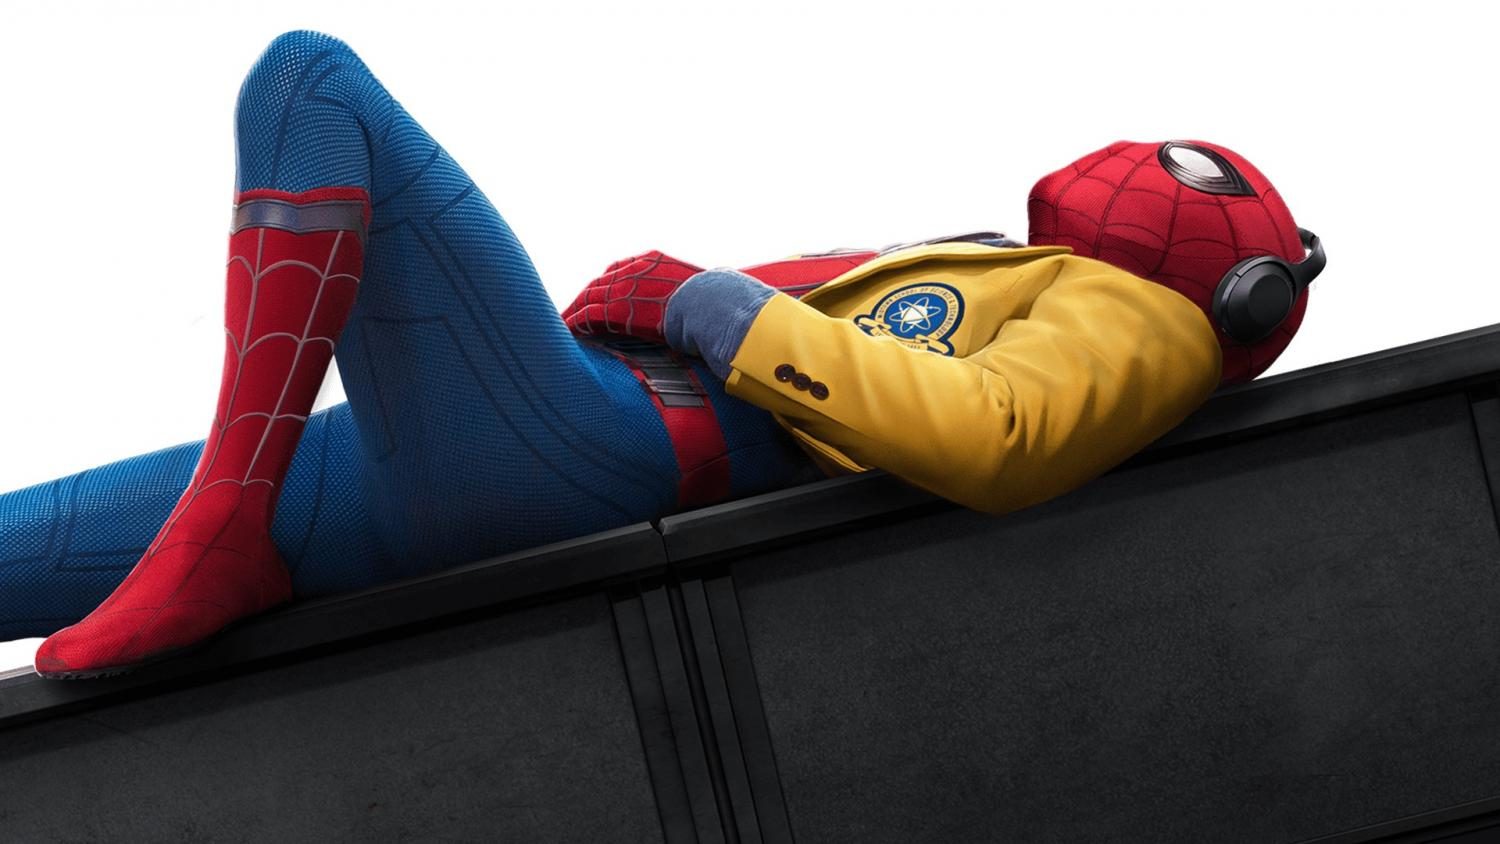 Spider-Man swings into theaters, topping box office